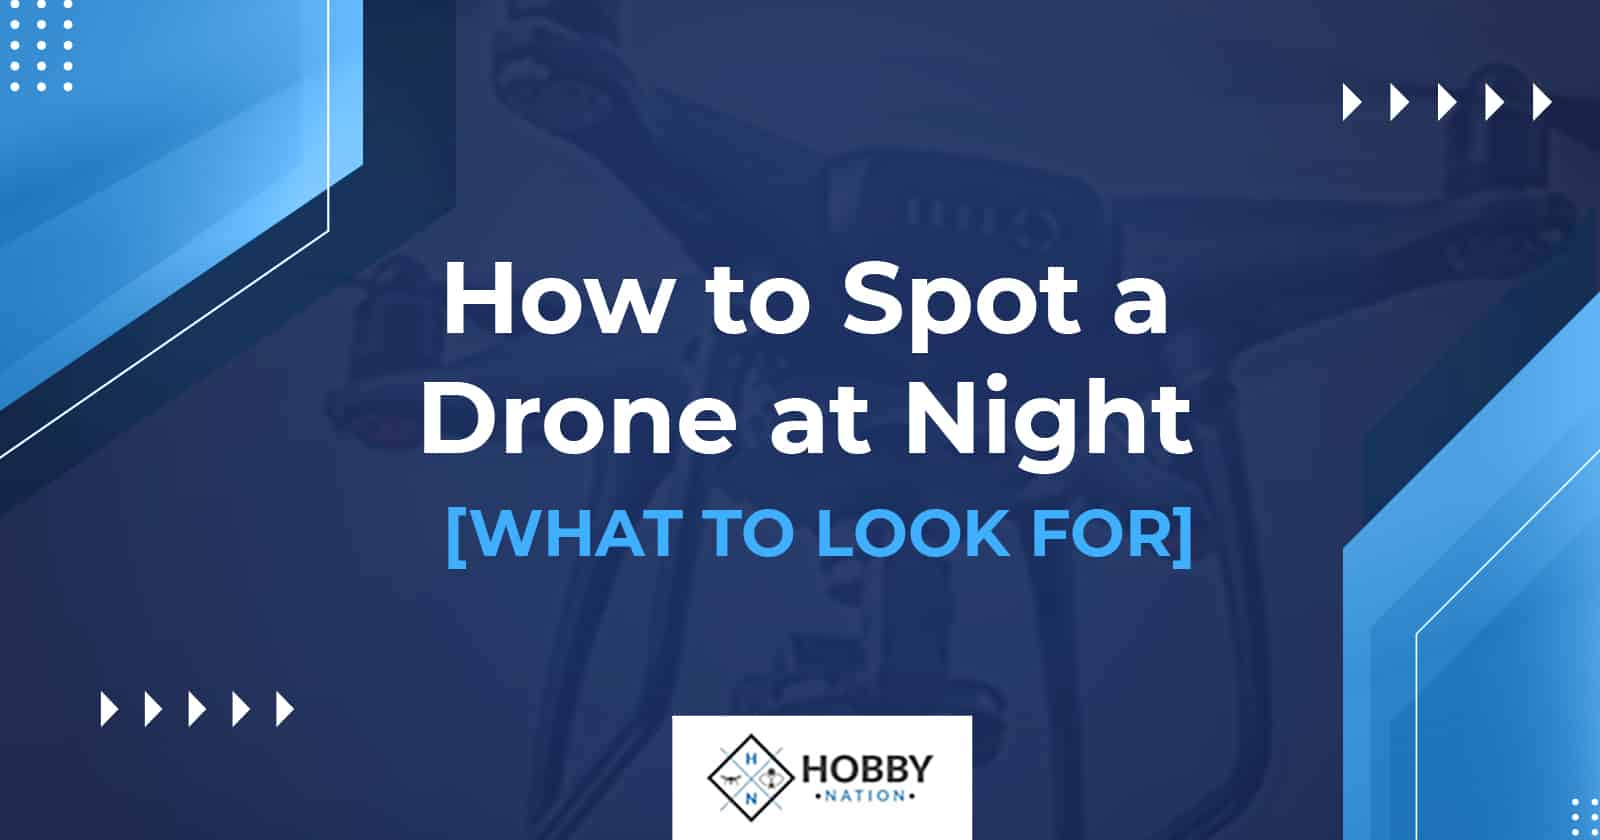 How to Spot a Drone at Night [WHAT TO LOOK FOR]